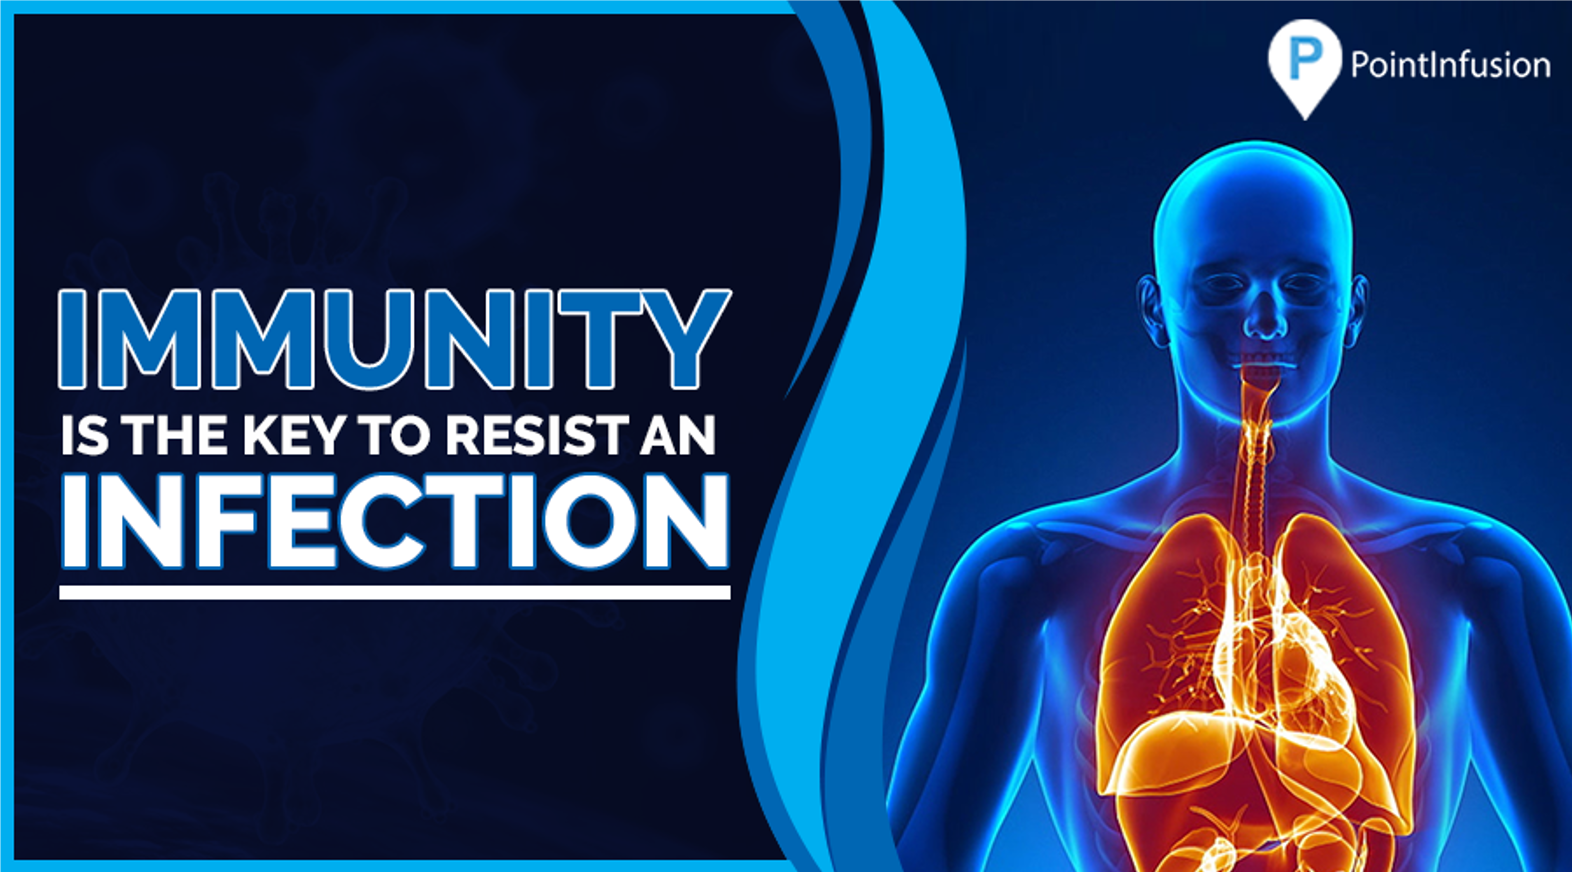 Immunity is the key to resist an infection - PointInfusion